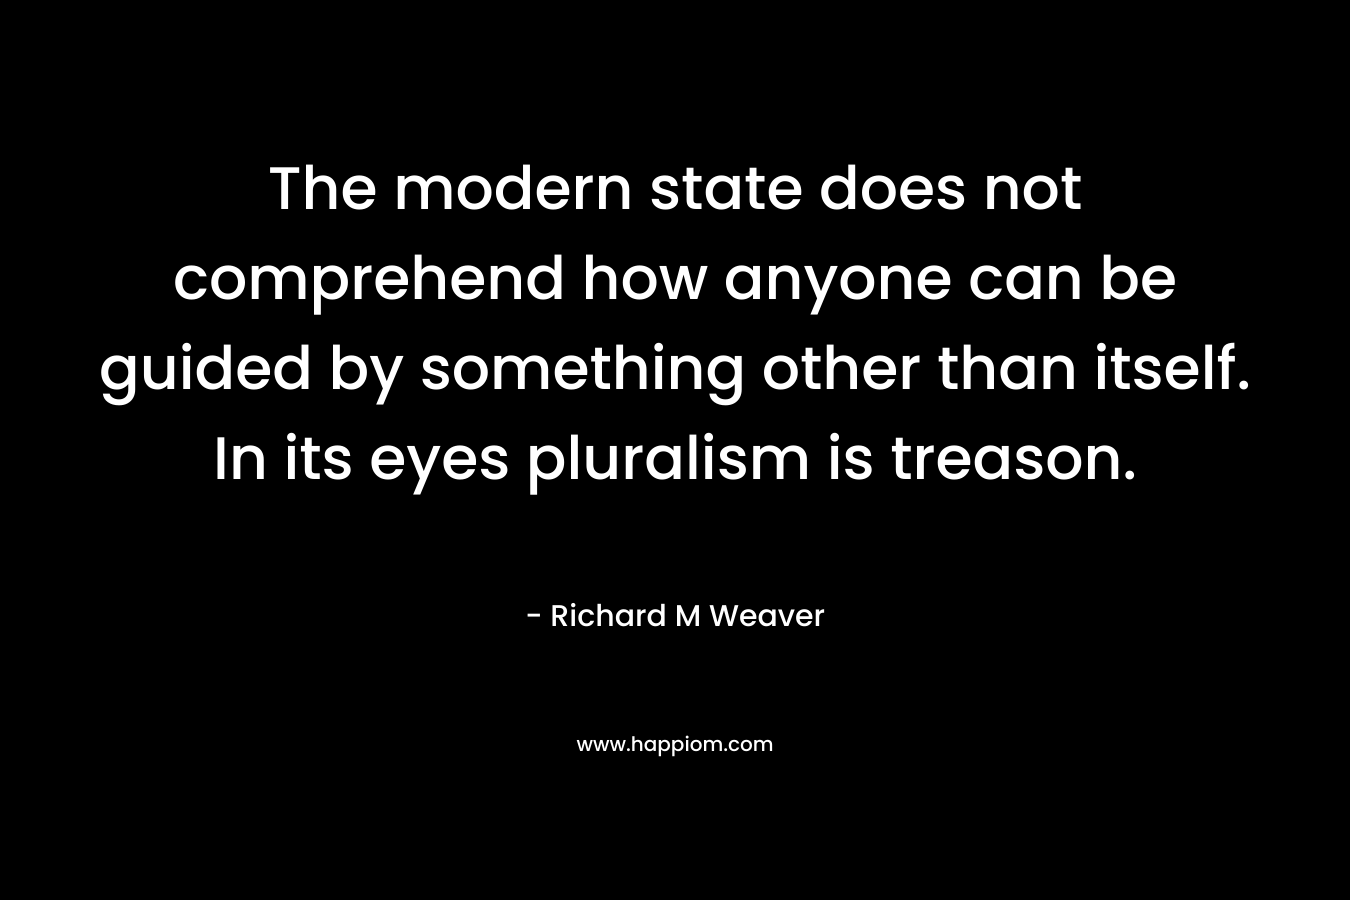 The modern state does not comprehend how anyone can be guided by something other than itself. In its eyes pluralism is treason.